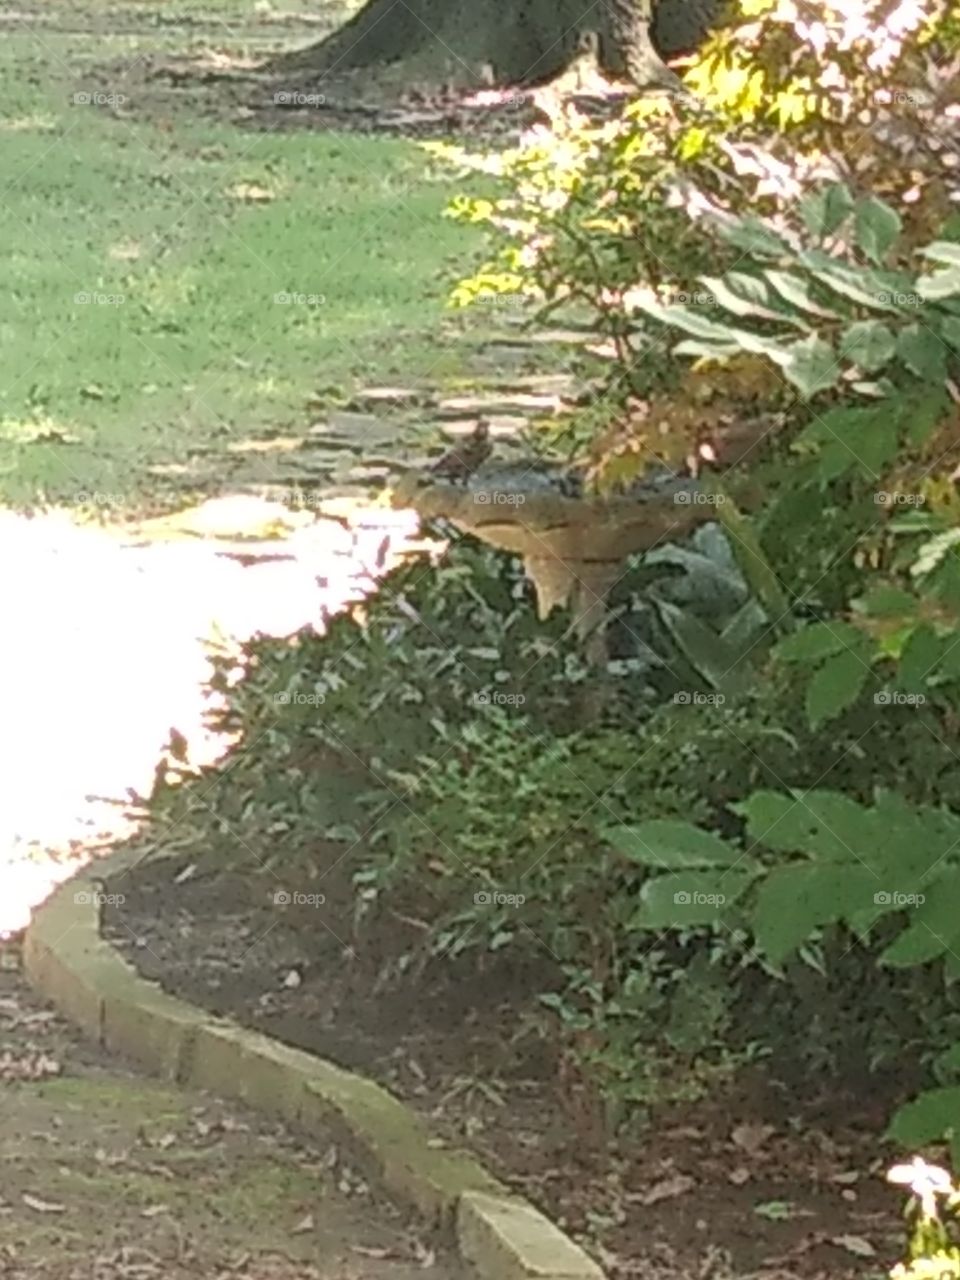 it's hoooot in Arkansas, just look closely at the bird drinkn water from neighbors front yard